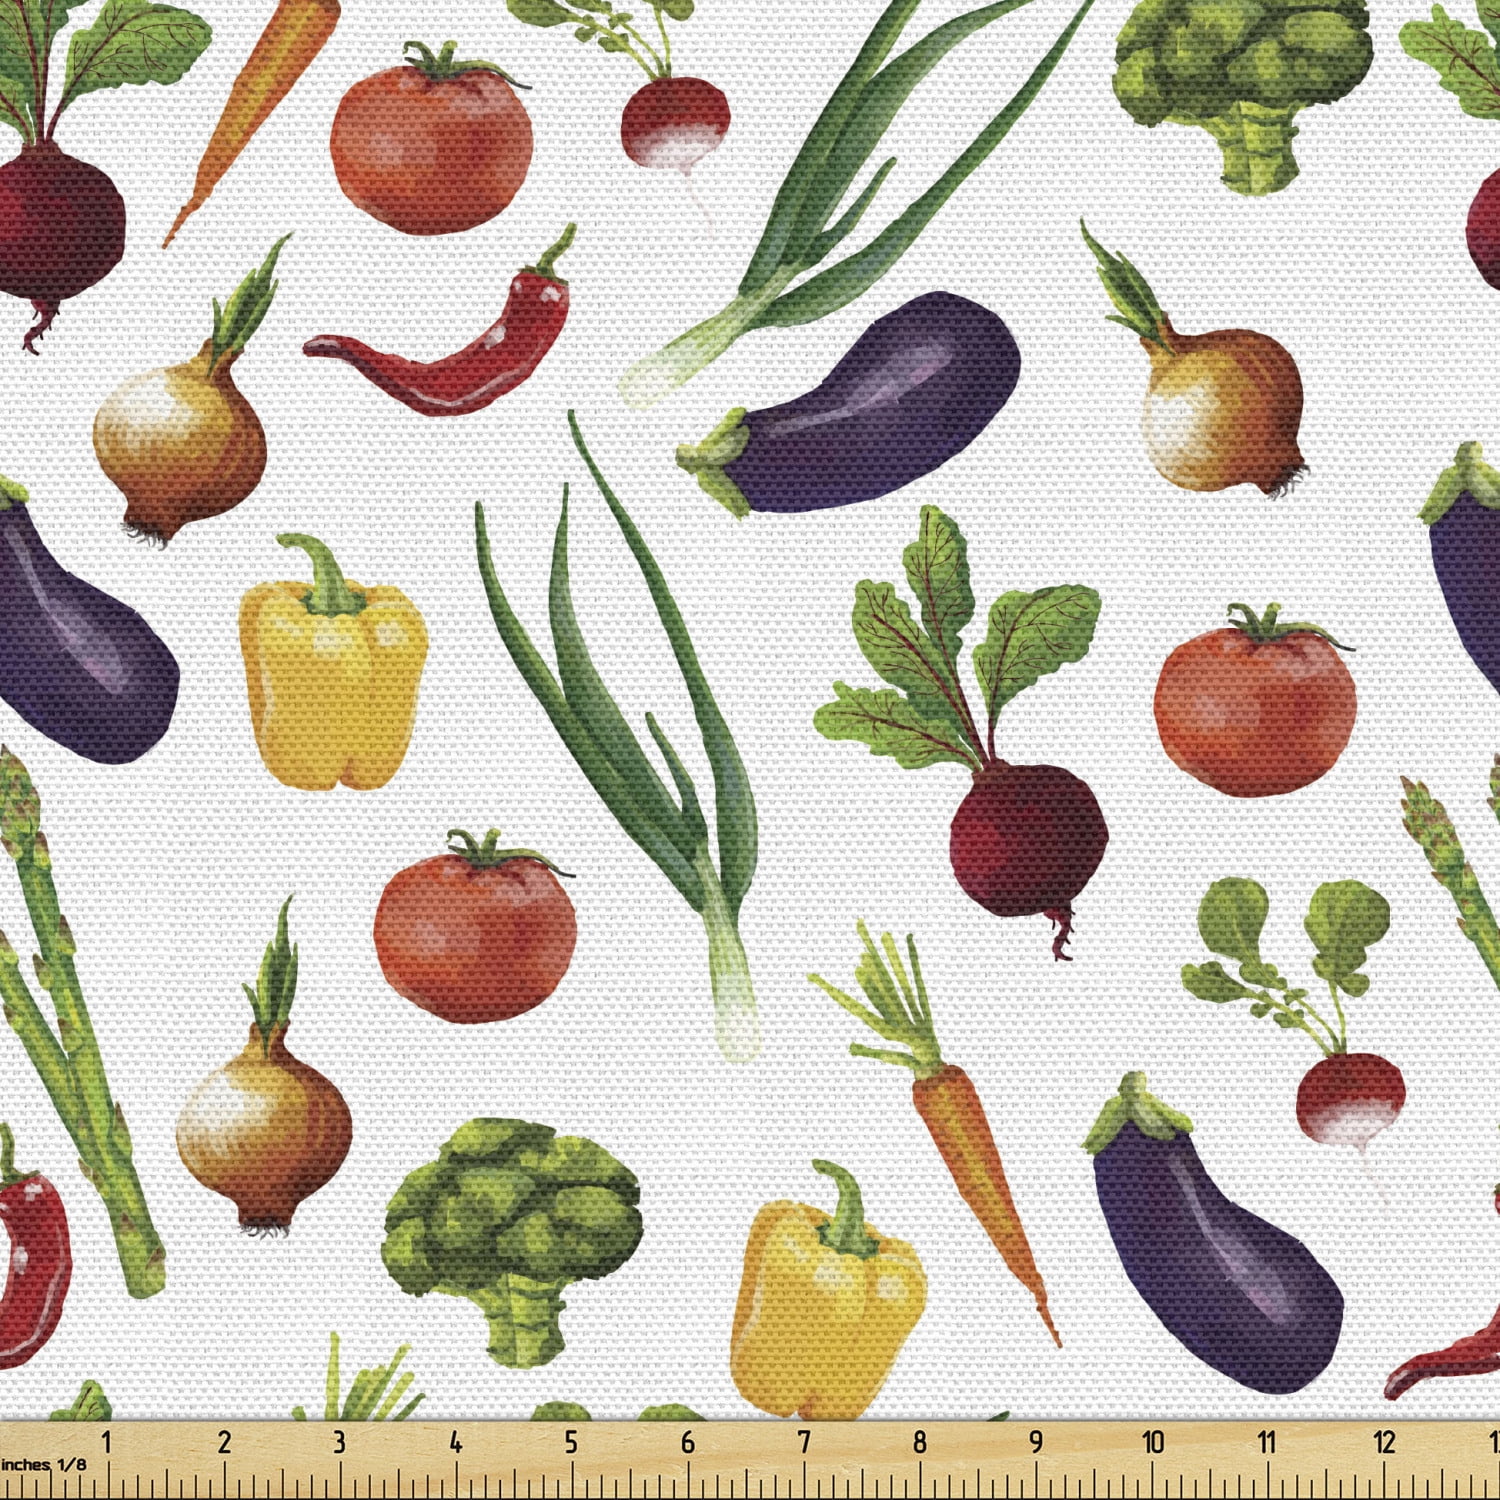 100% Cotton Fabric BTY 45" Vintage Look Vegetables Eggplant Tomatos Carrots 